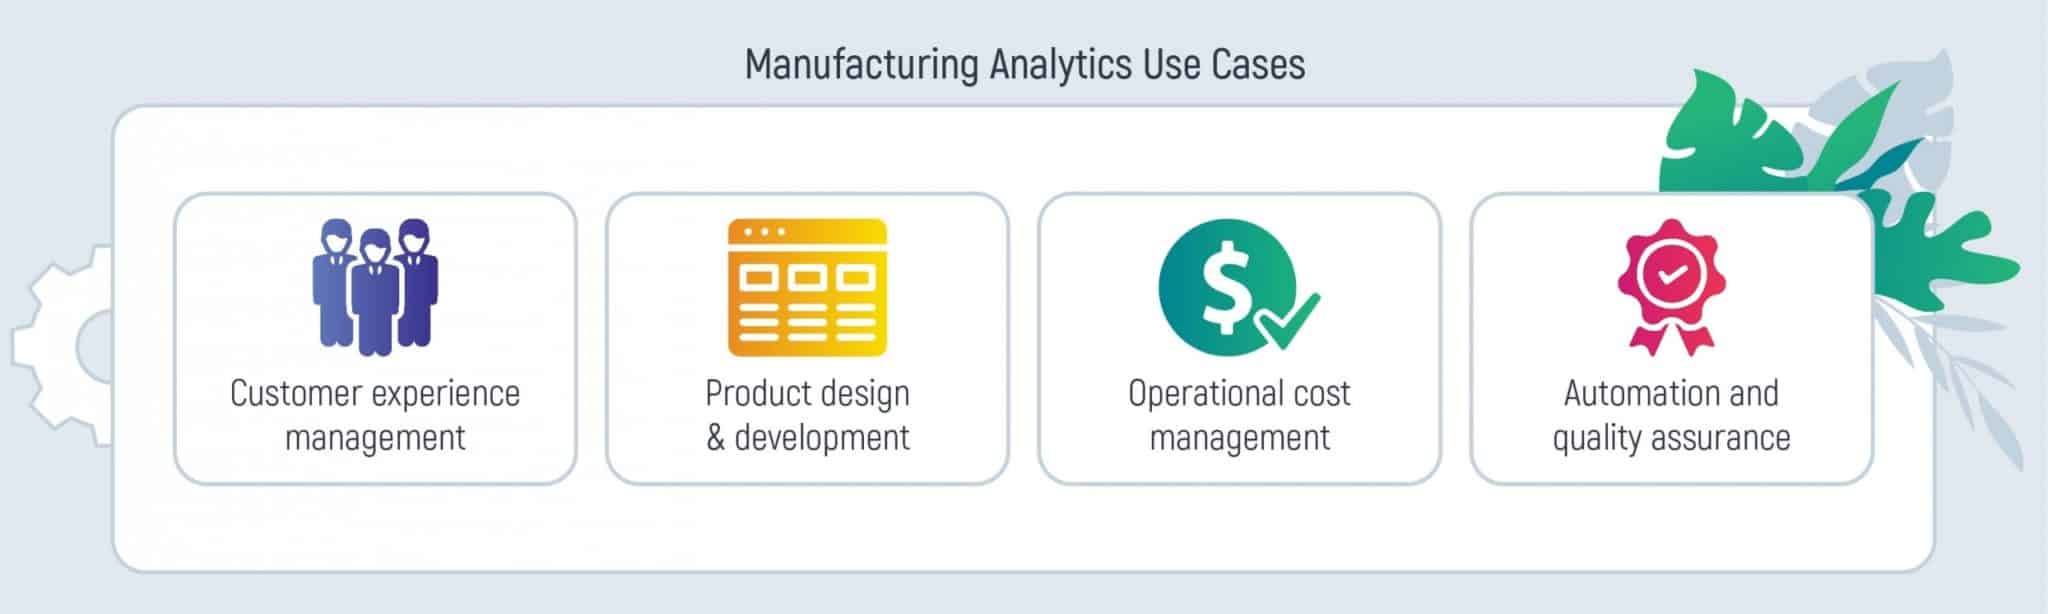 Manufacturing Analytics Use Cases